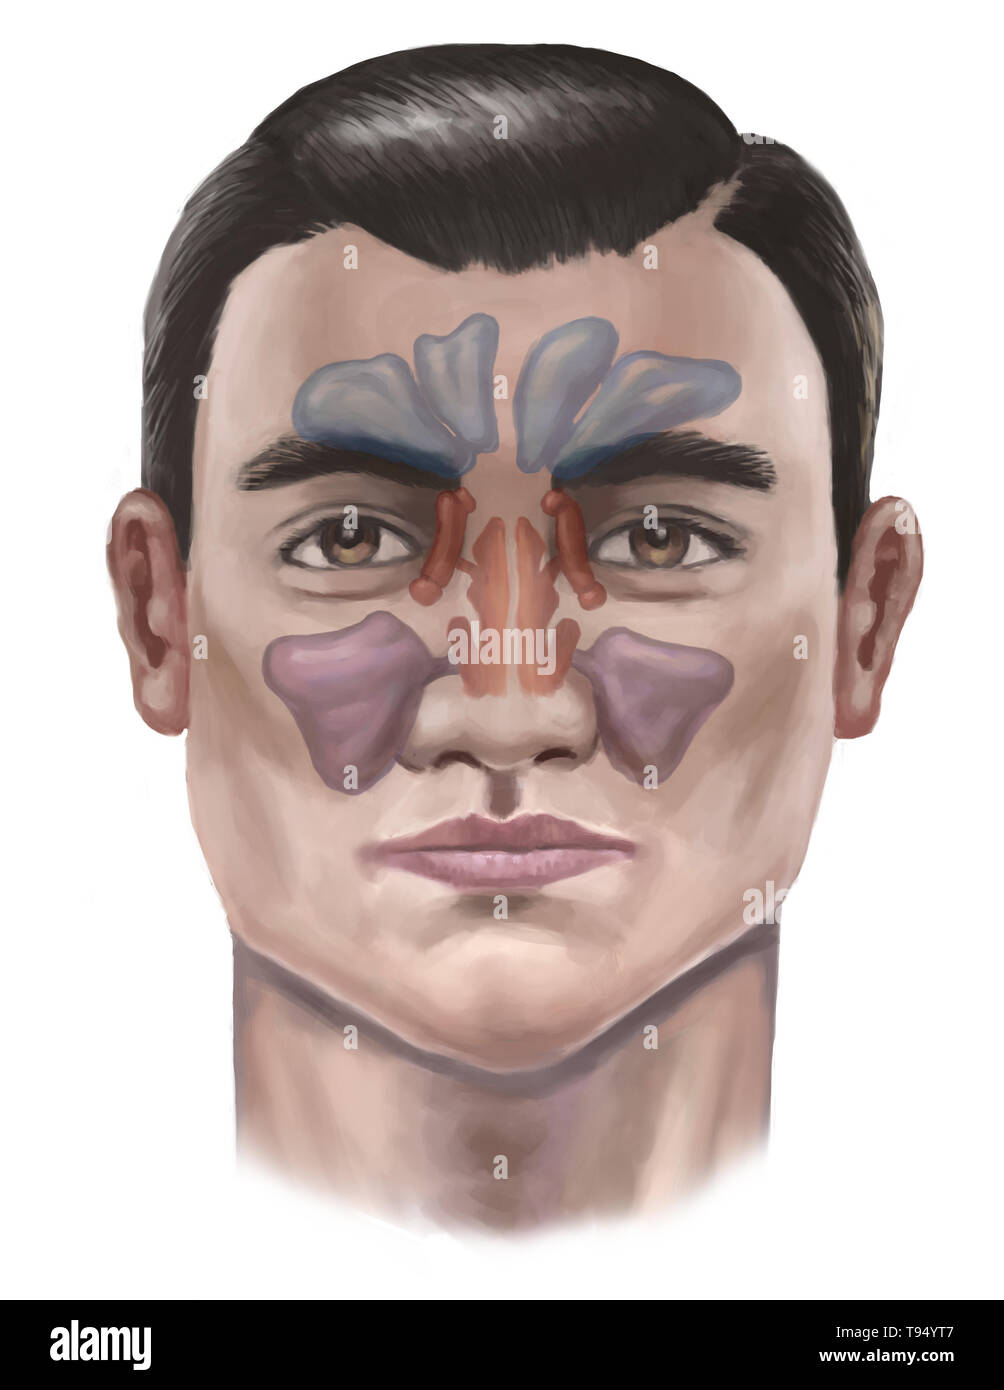 Illustration of the sinuses. From top to bottom, they include: the frontal sinus, the sphenoidal sinus, the ethmoid sinus, and the maxillary sinus. Stock Photo